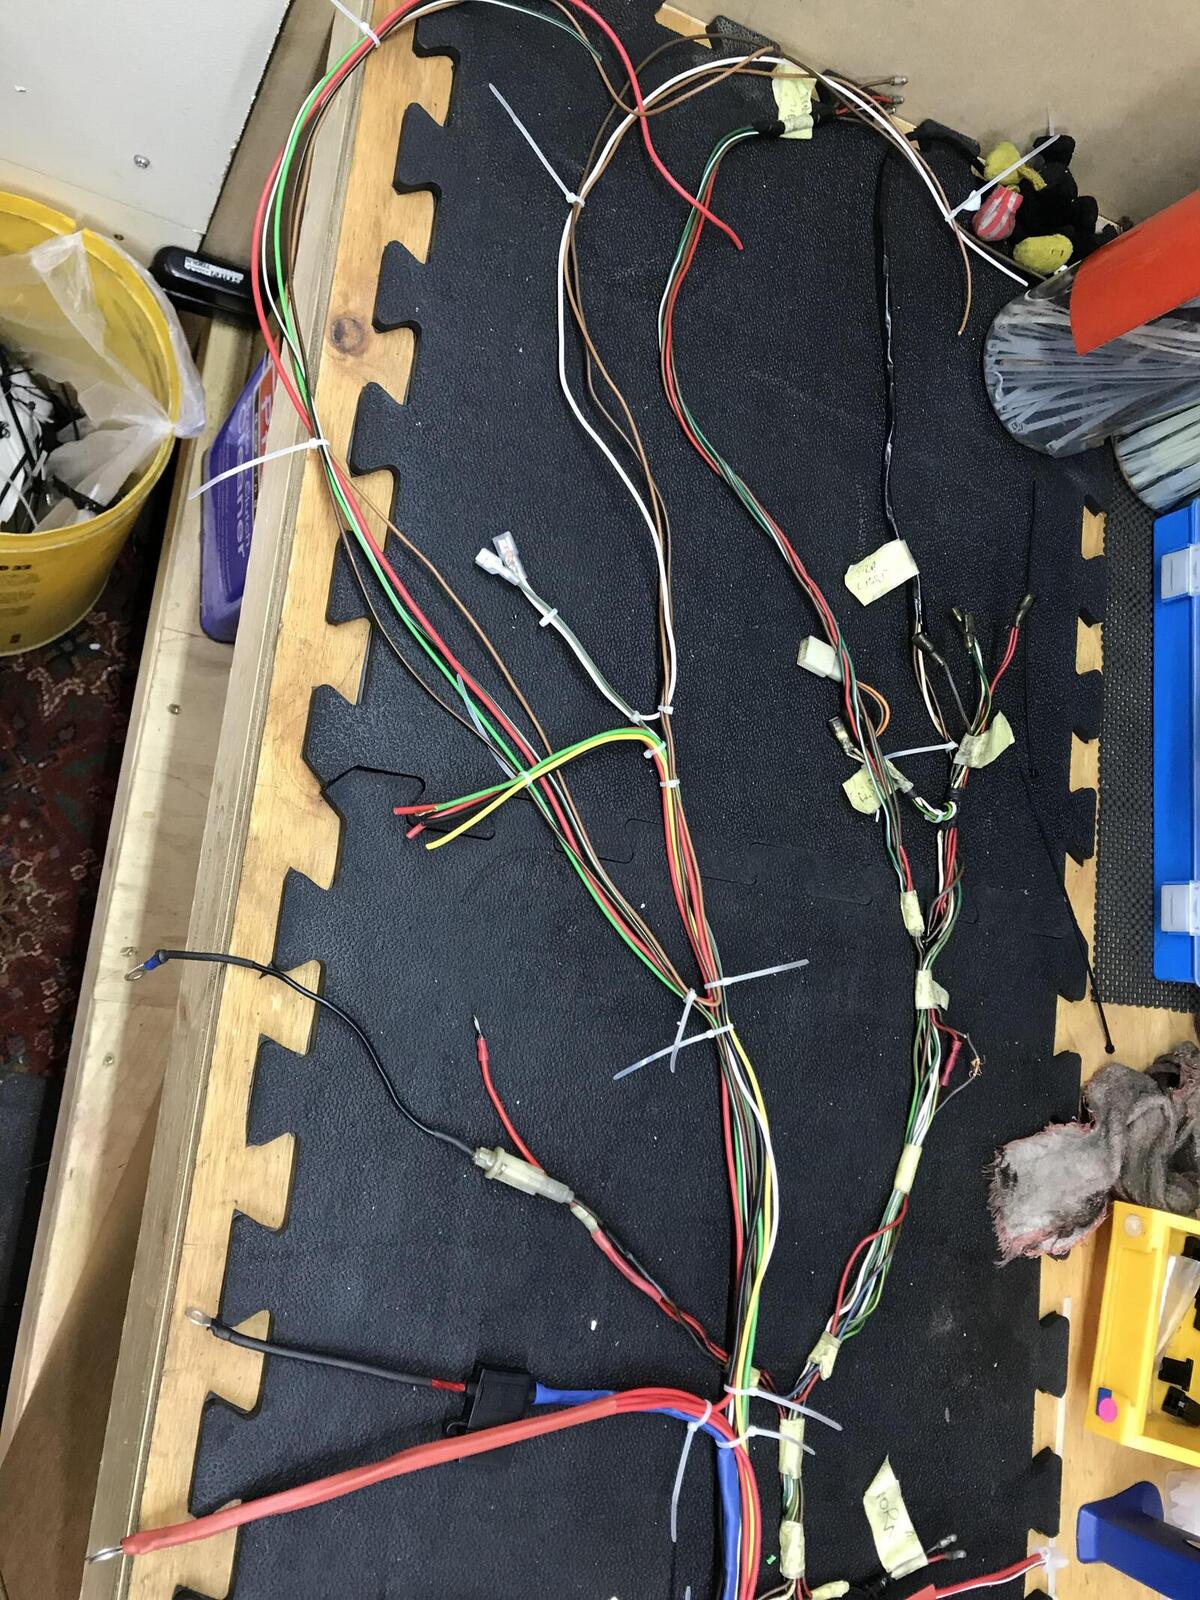 I am building my own wiring harness